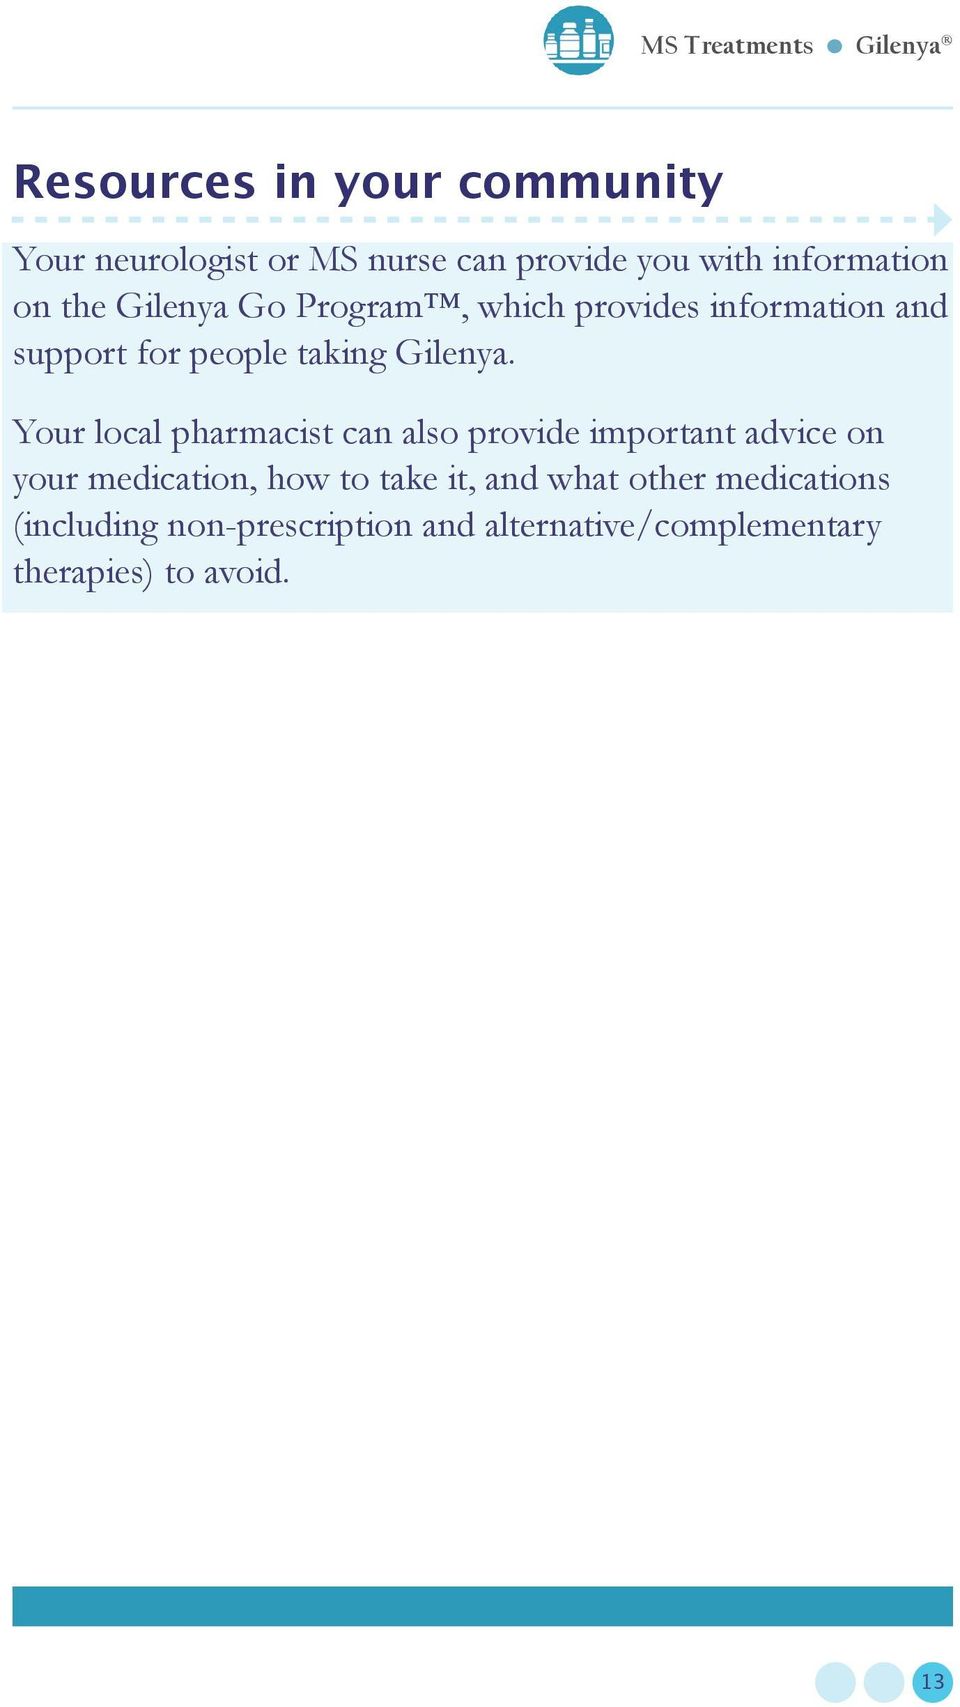 Your local pharmacist can also provide important advice on your medication, how to take it, and